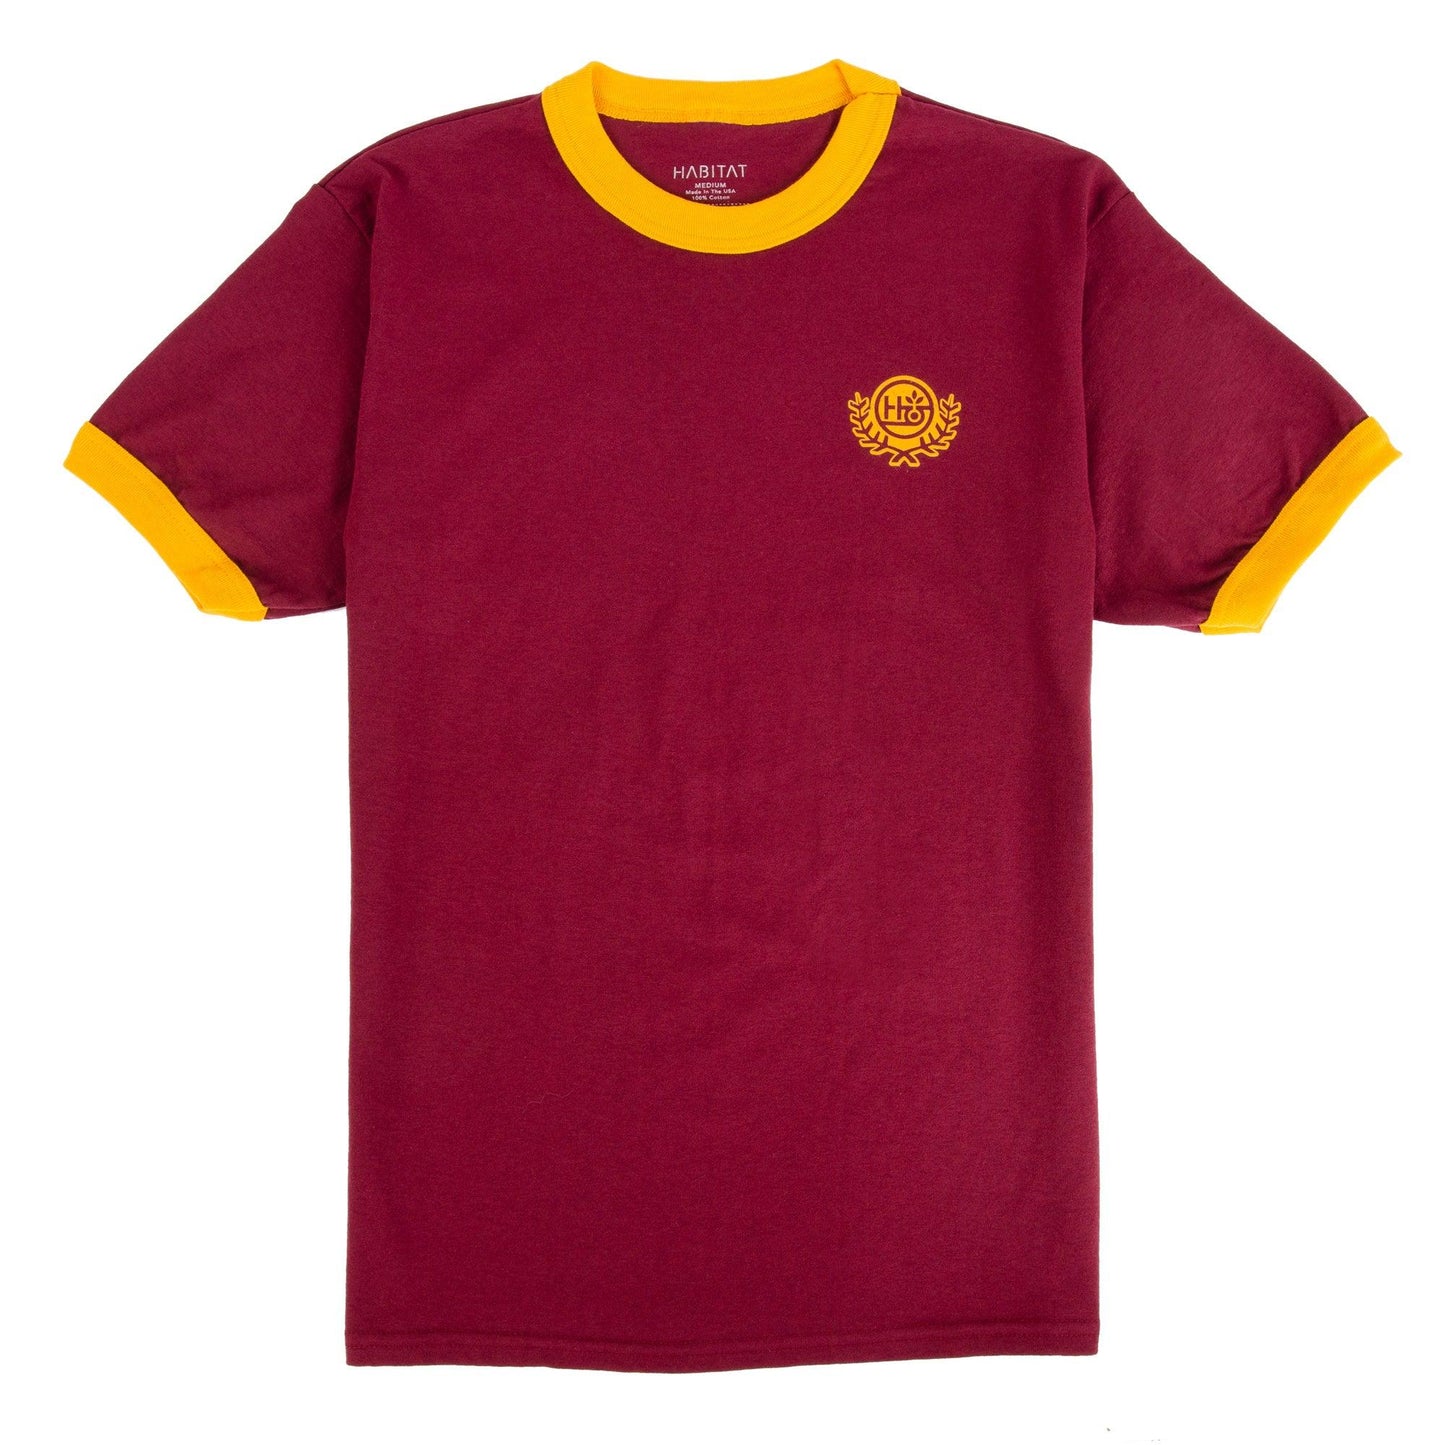 Coat of Arms Ringer T-Shirt Maroon